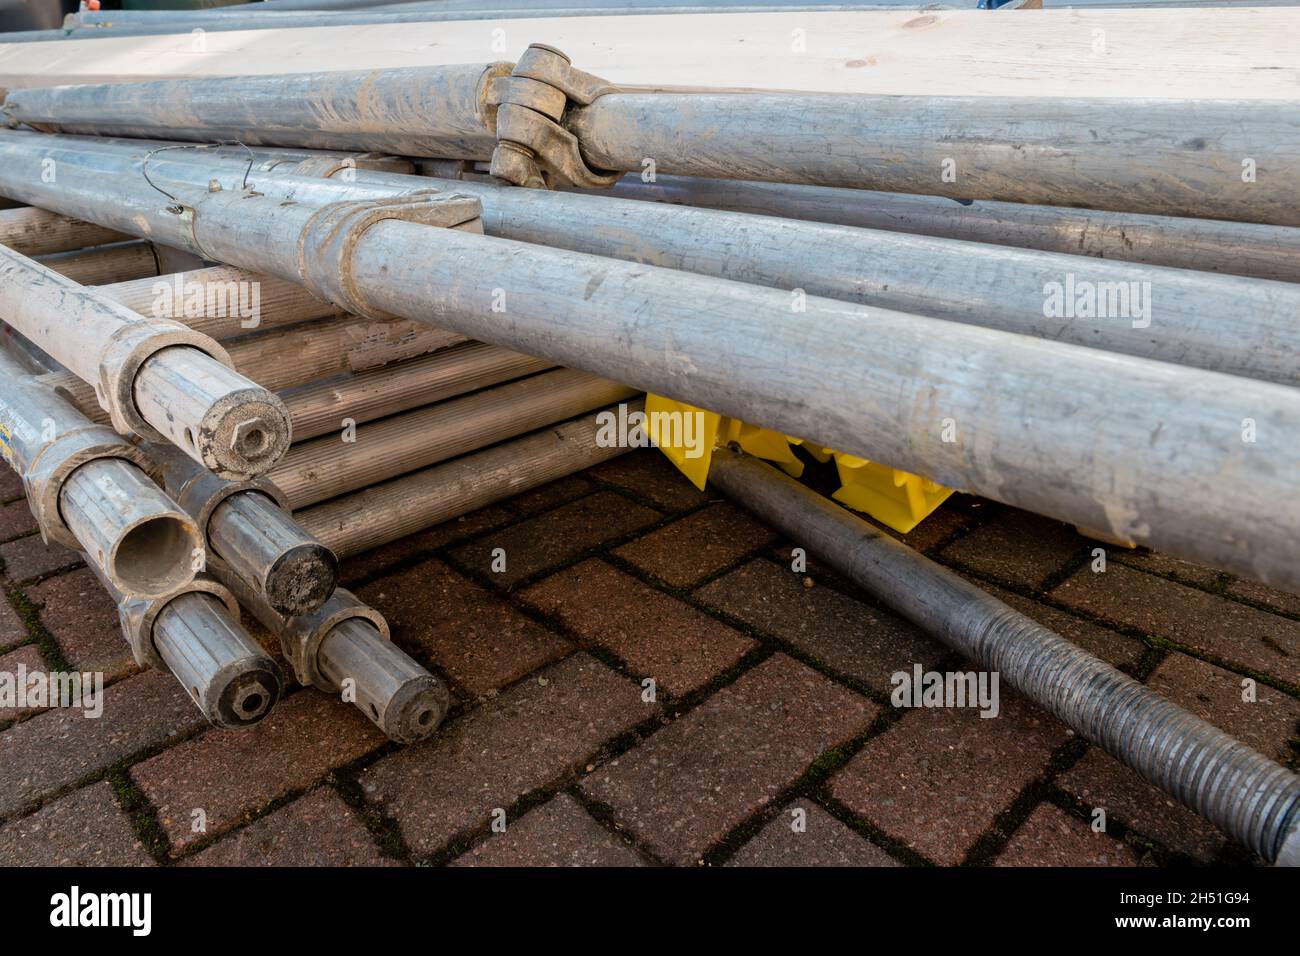 Pile of components of hired scaffolding or mobile platform work tower Stock Photo